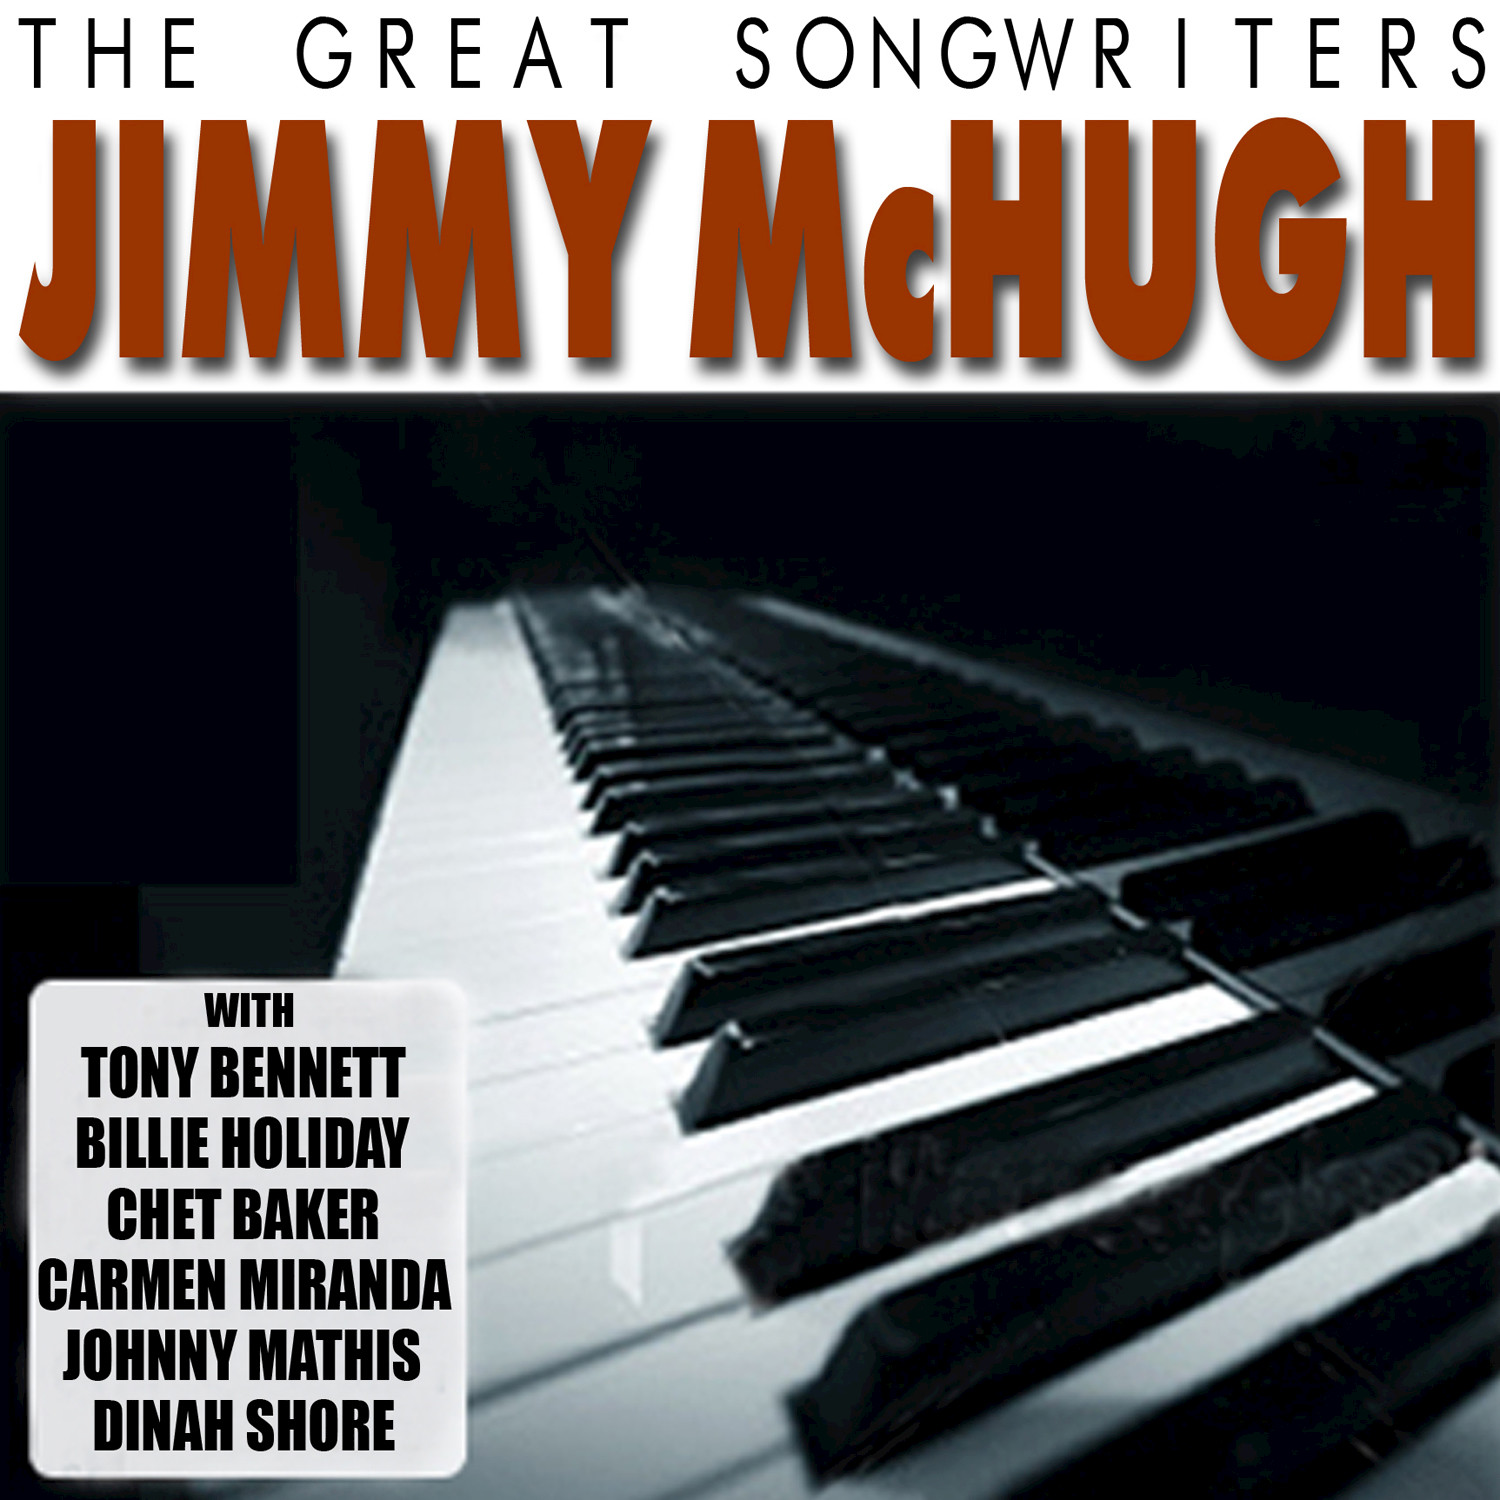 The Great Songwriters - Jimmy McHugh